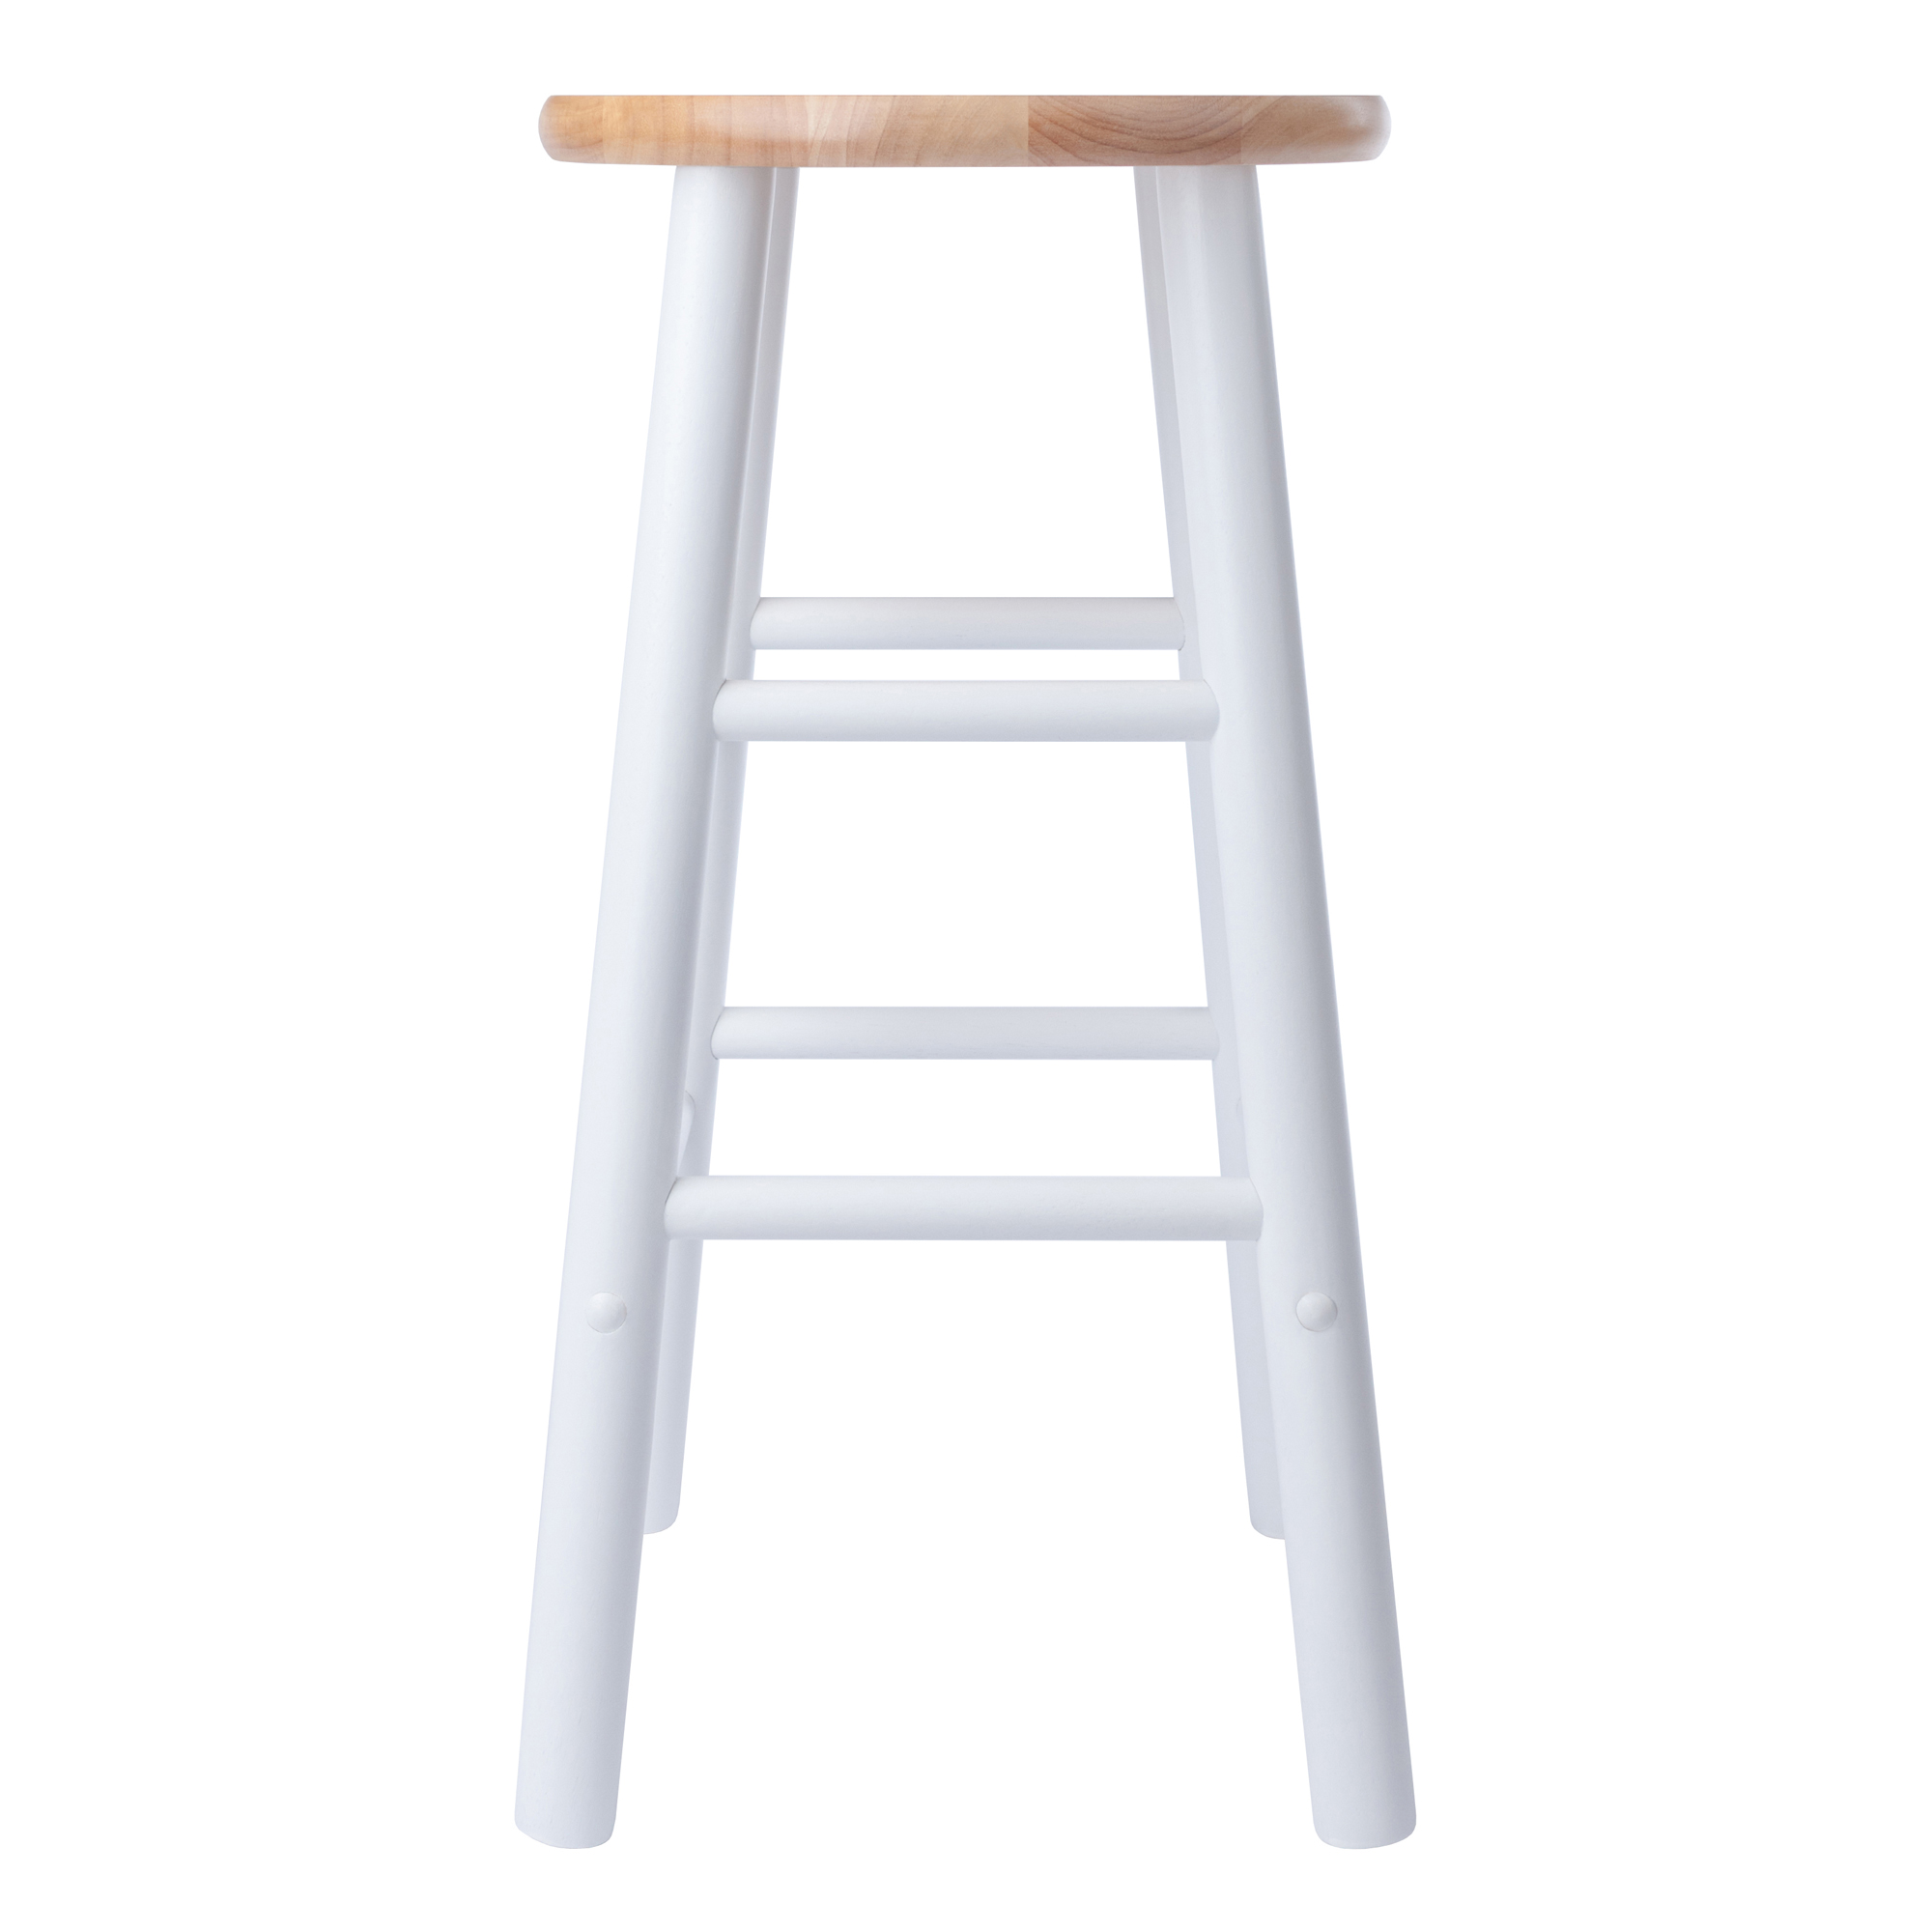 Winsome Wood Huxton 2-Piece Counter Stools, Natural & White Finish - image 5 of 10